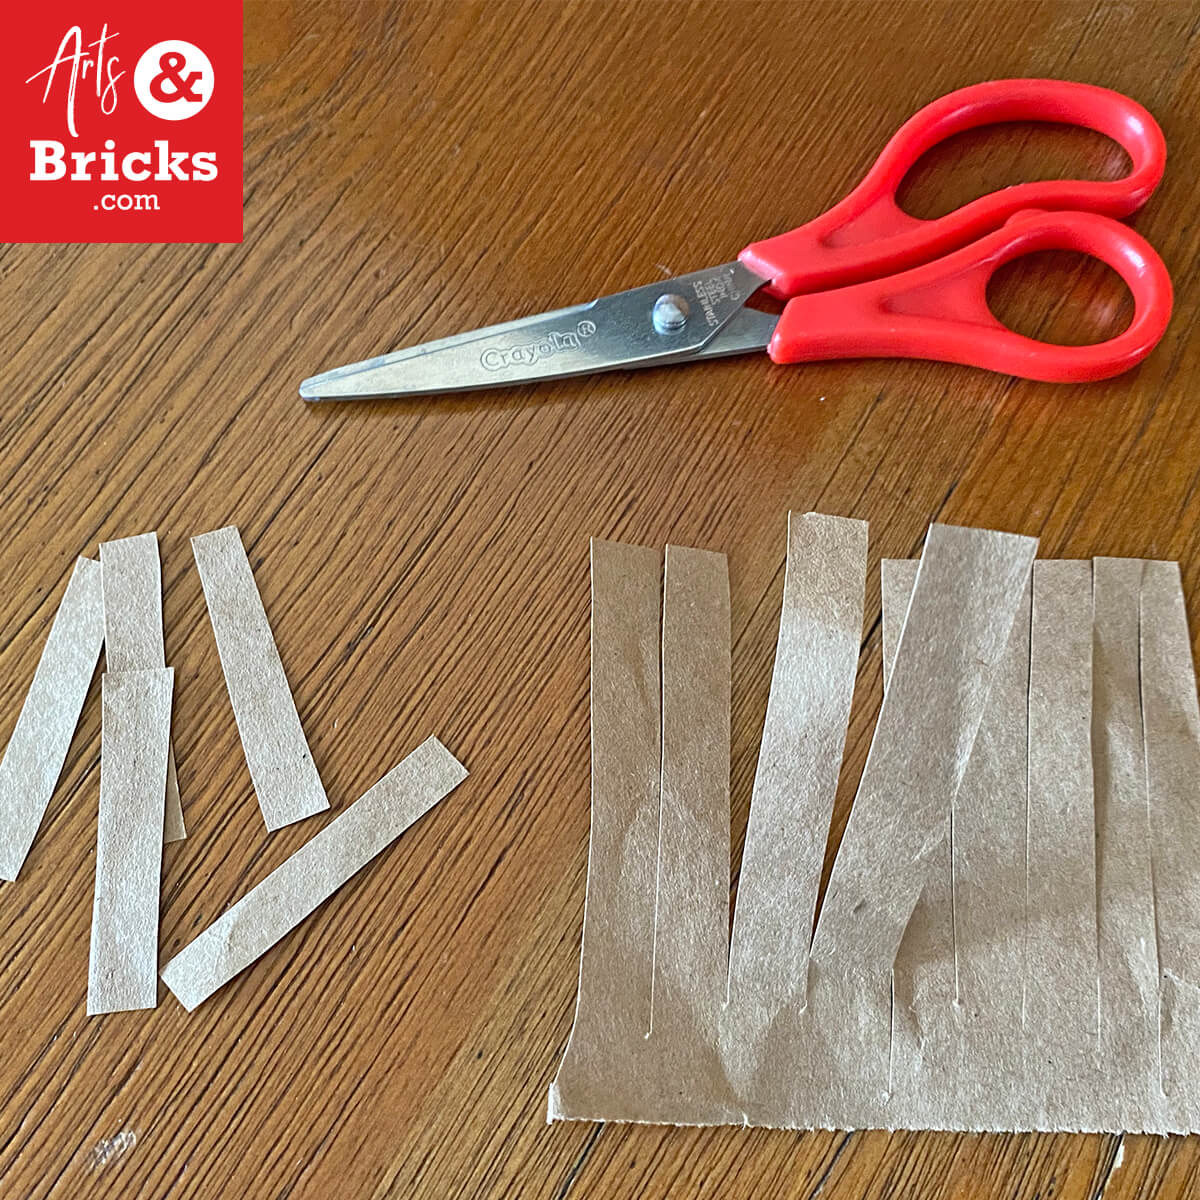 Options for making "paper sticks" to add to your paper bag nest